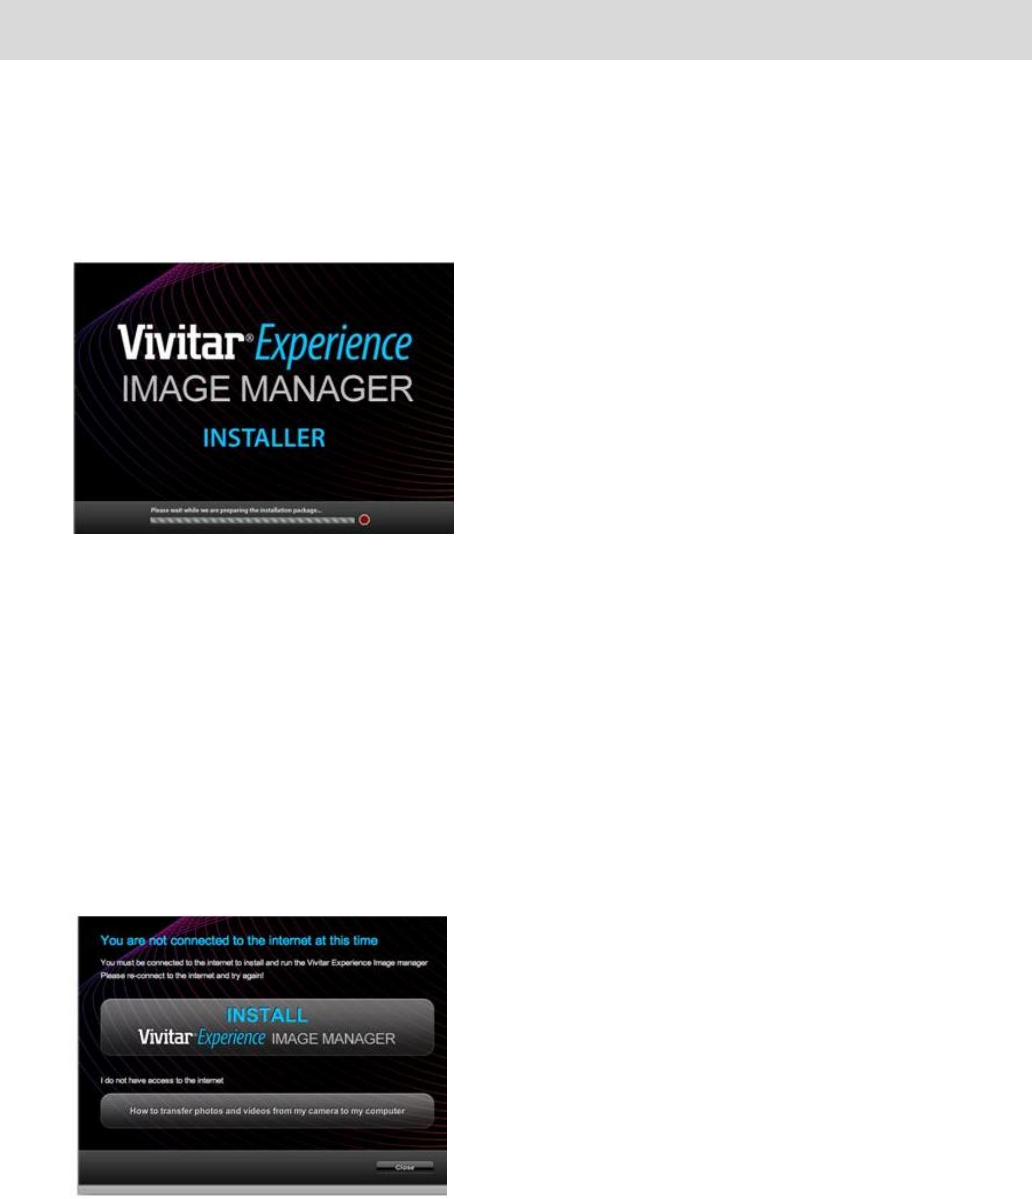 para que sirve vivitar experience image manager